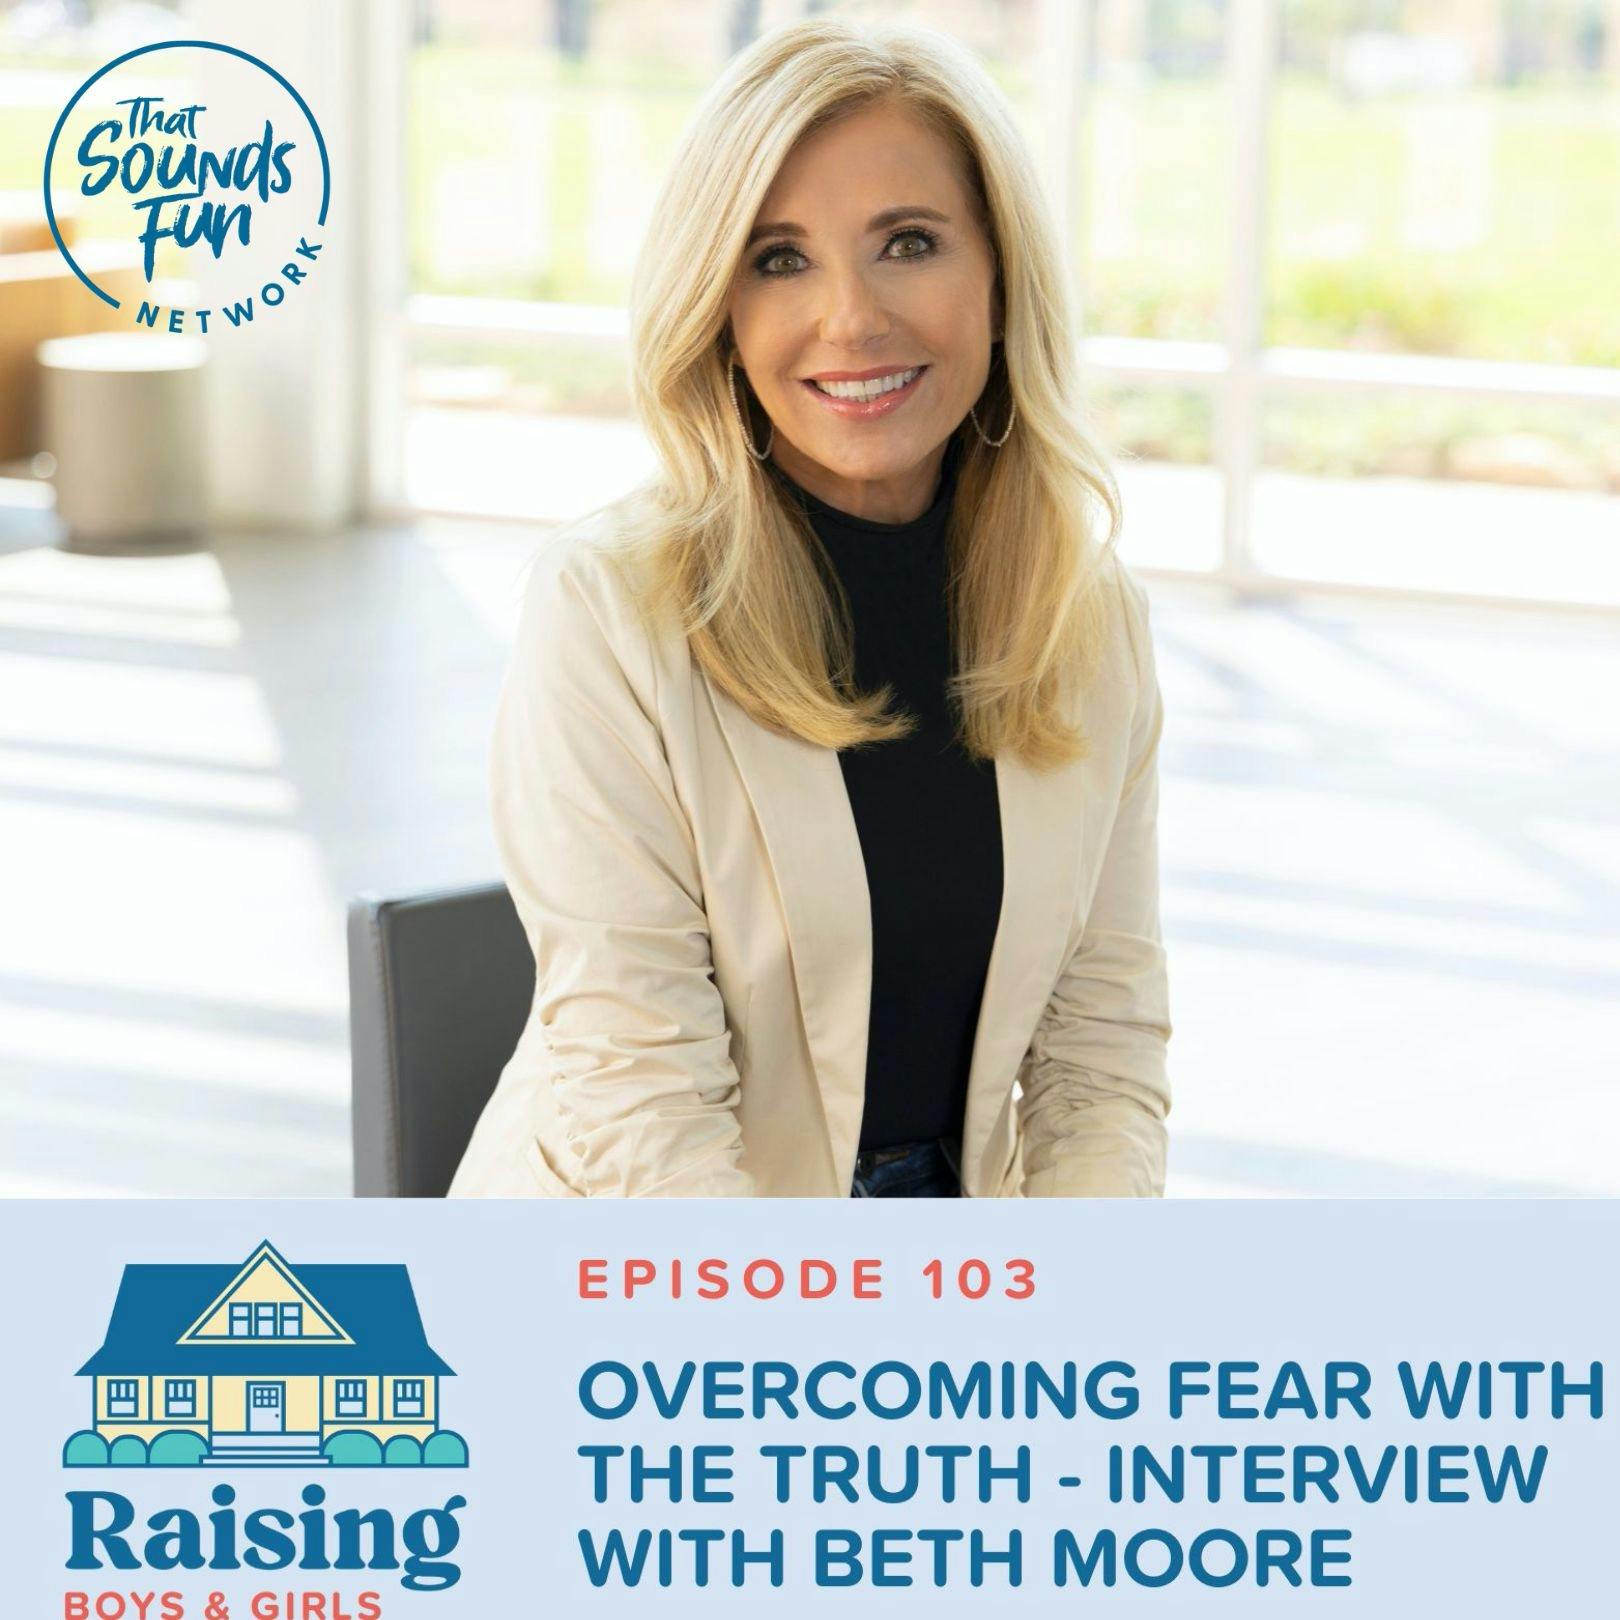 Episode 103: Overcoming Fear with the Truth - Interview with Beth Moore